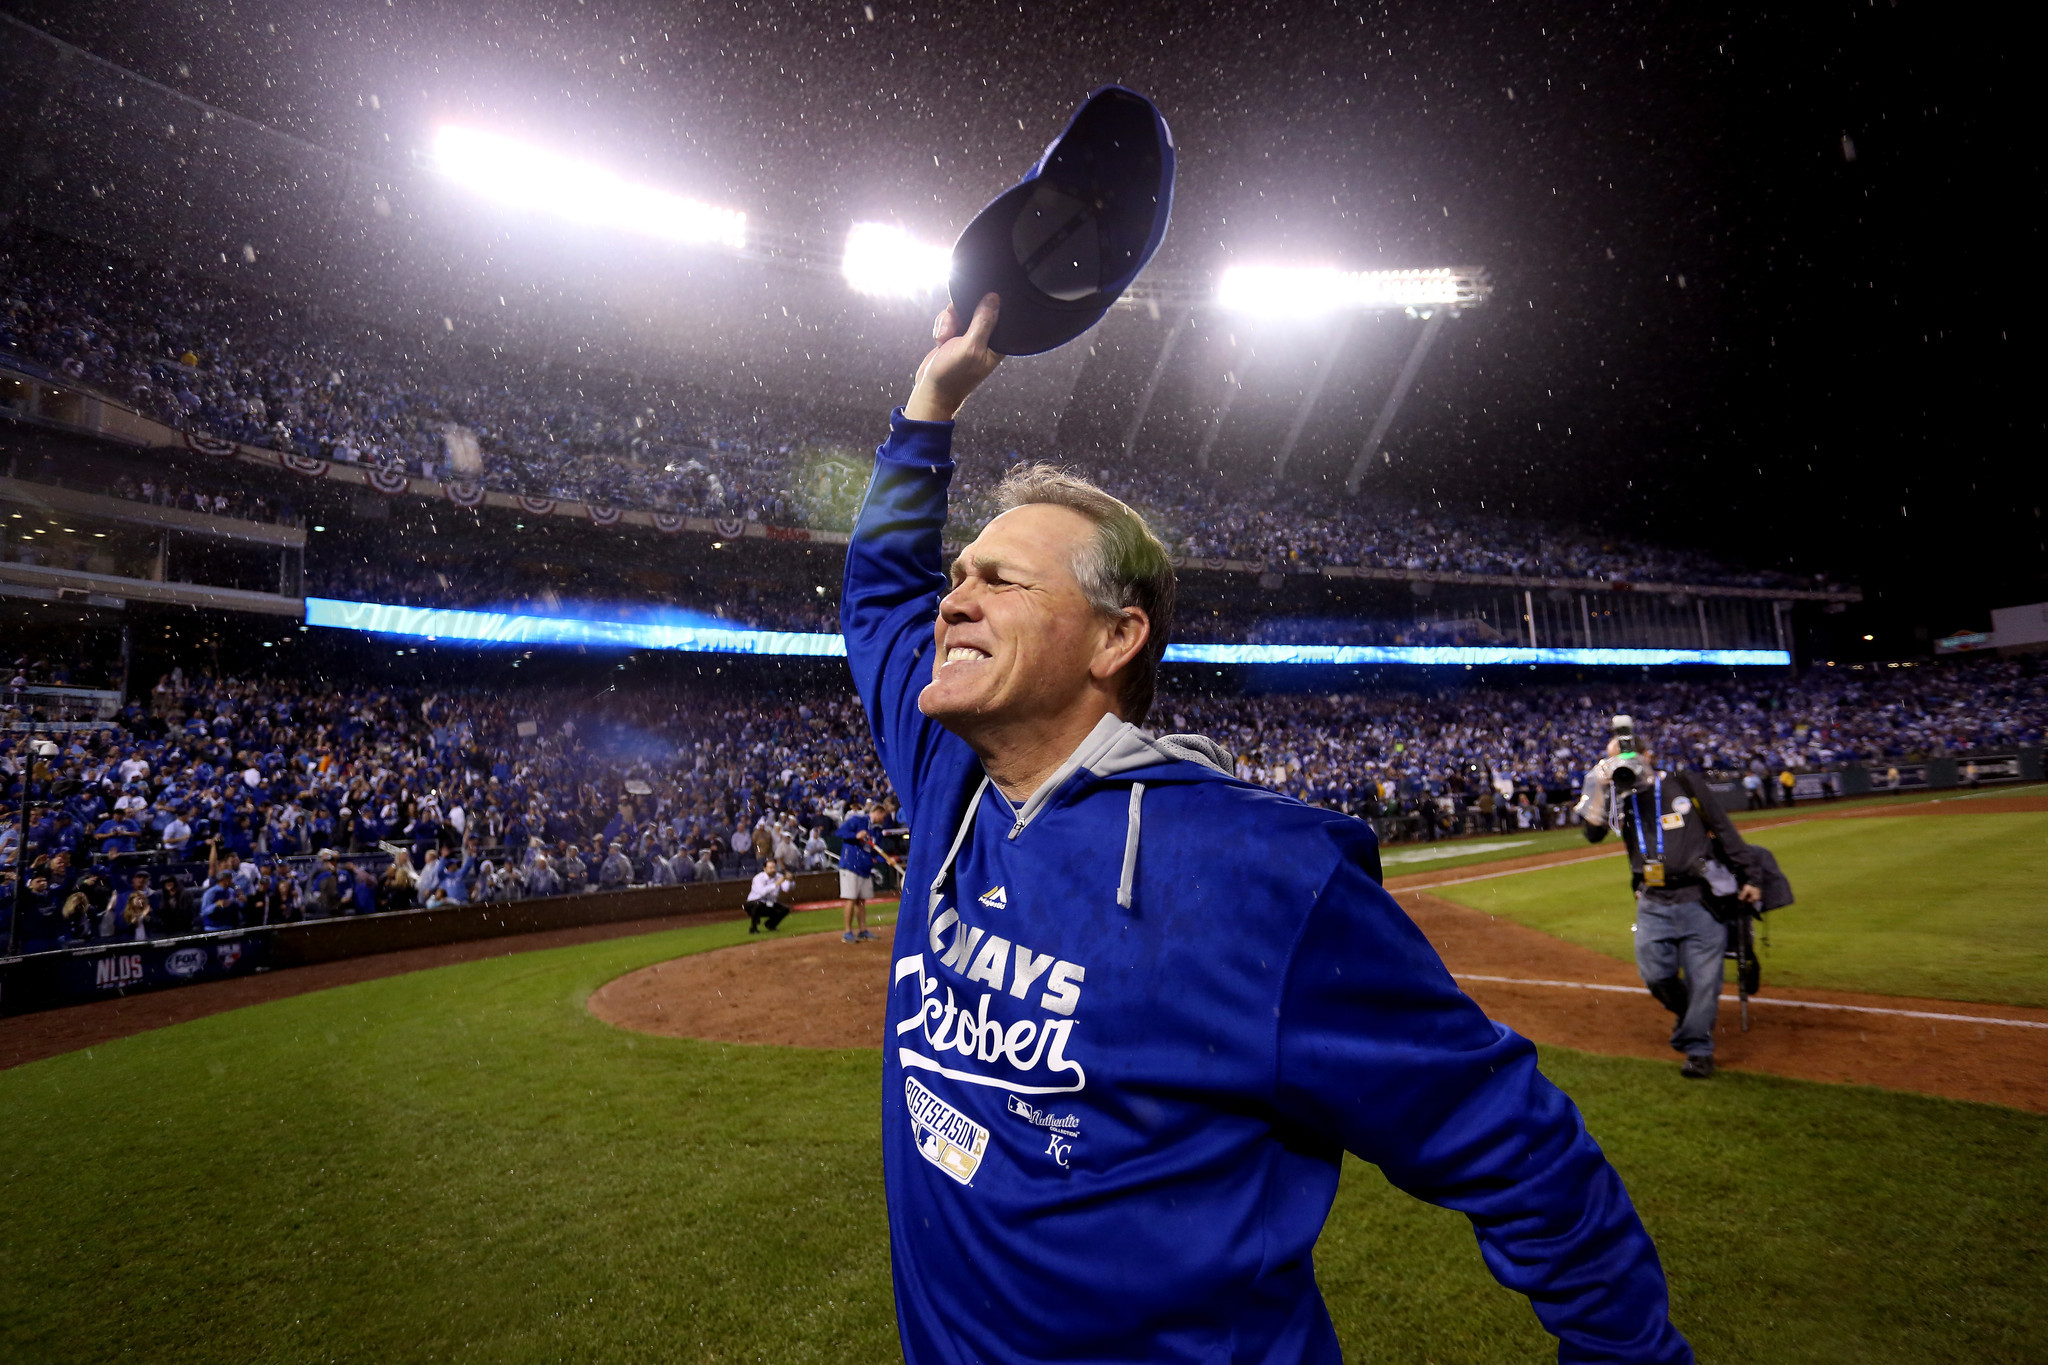 BEHIND ENEMY LINES   Royals manager Ned Yost enjoying first playoff run as manager